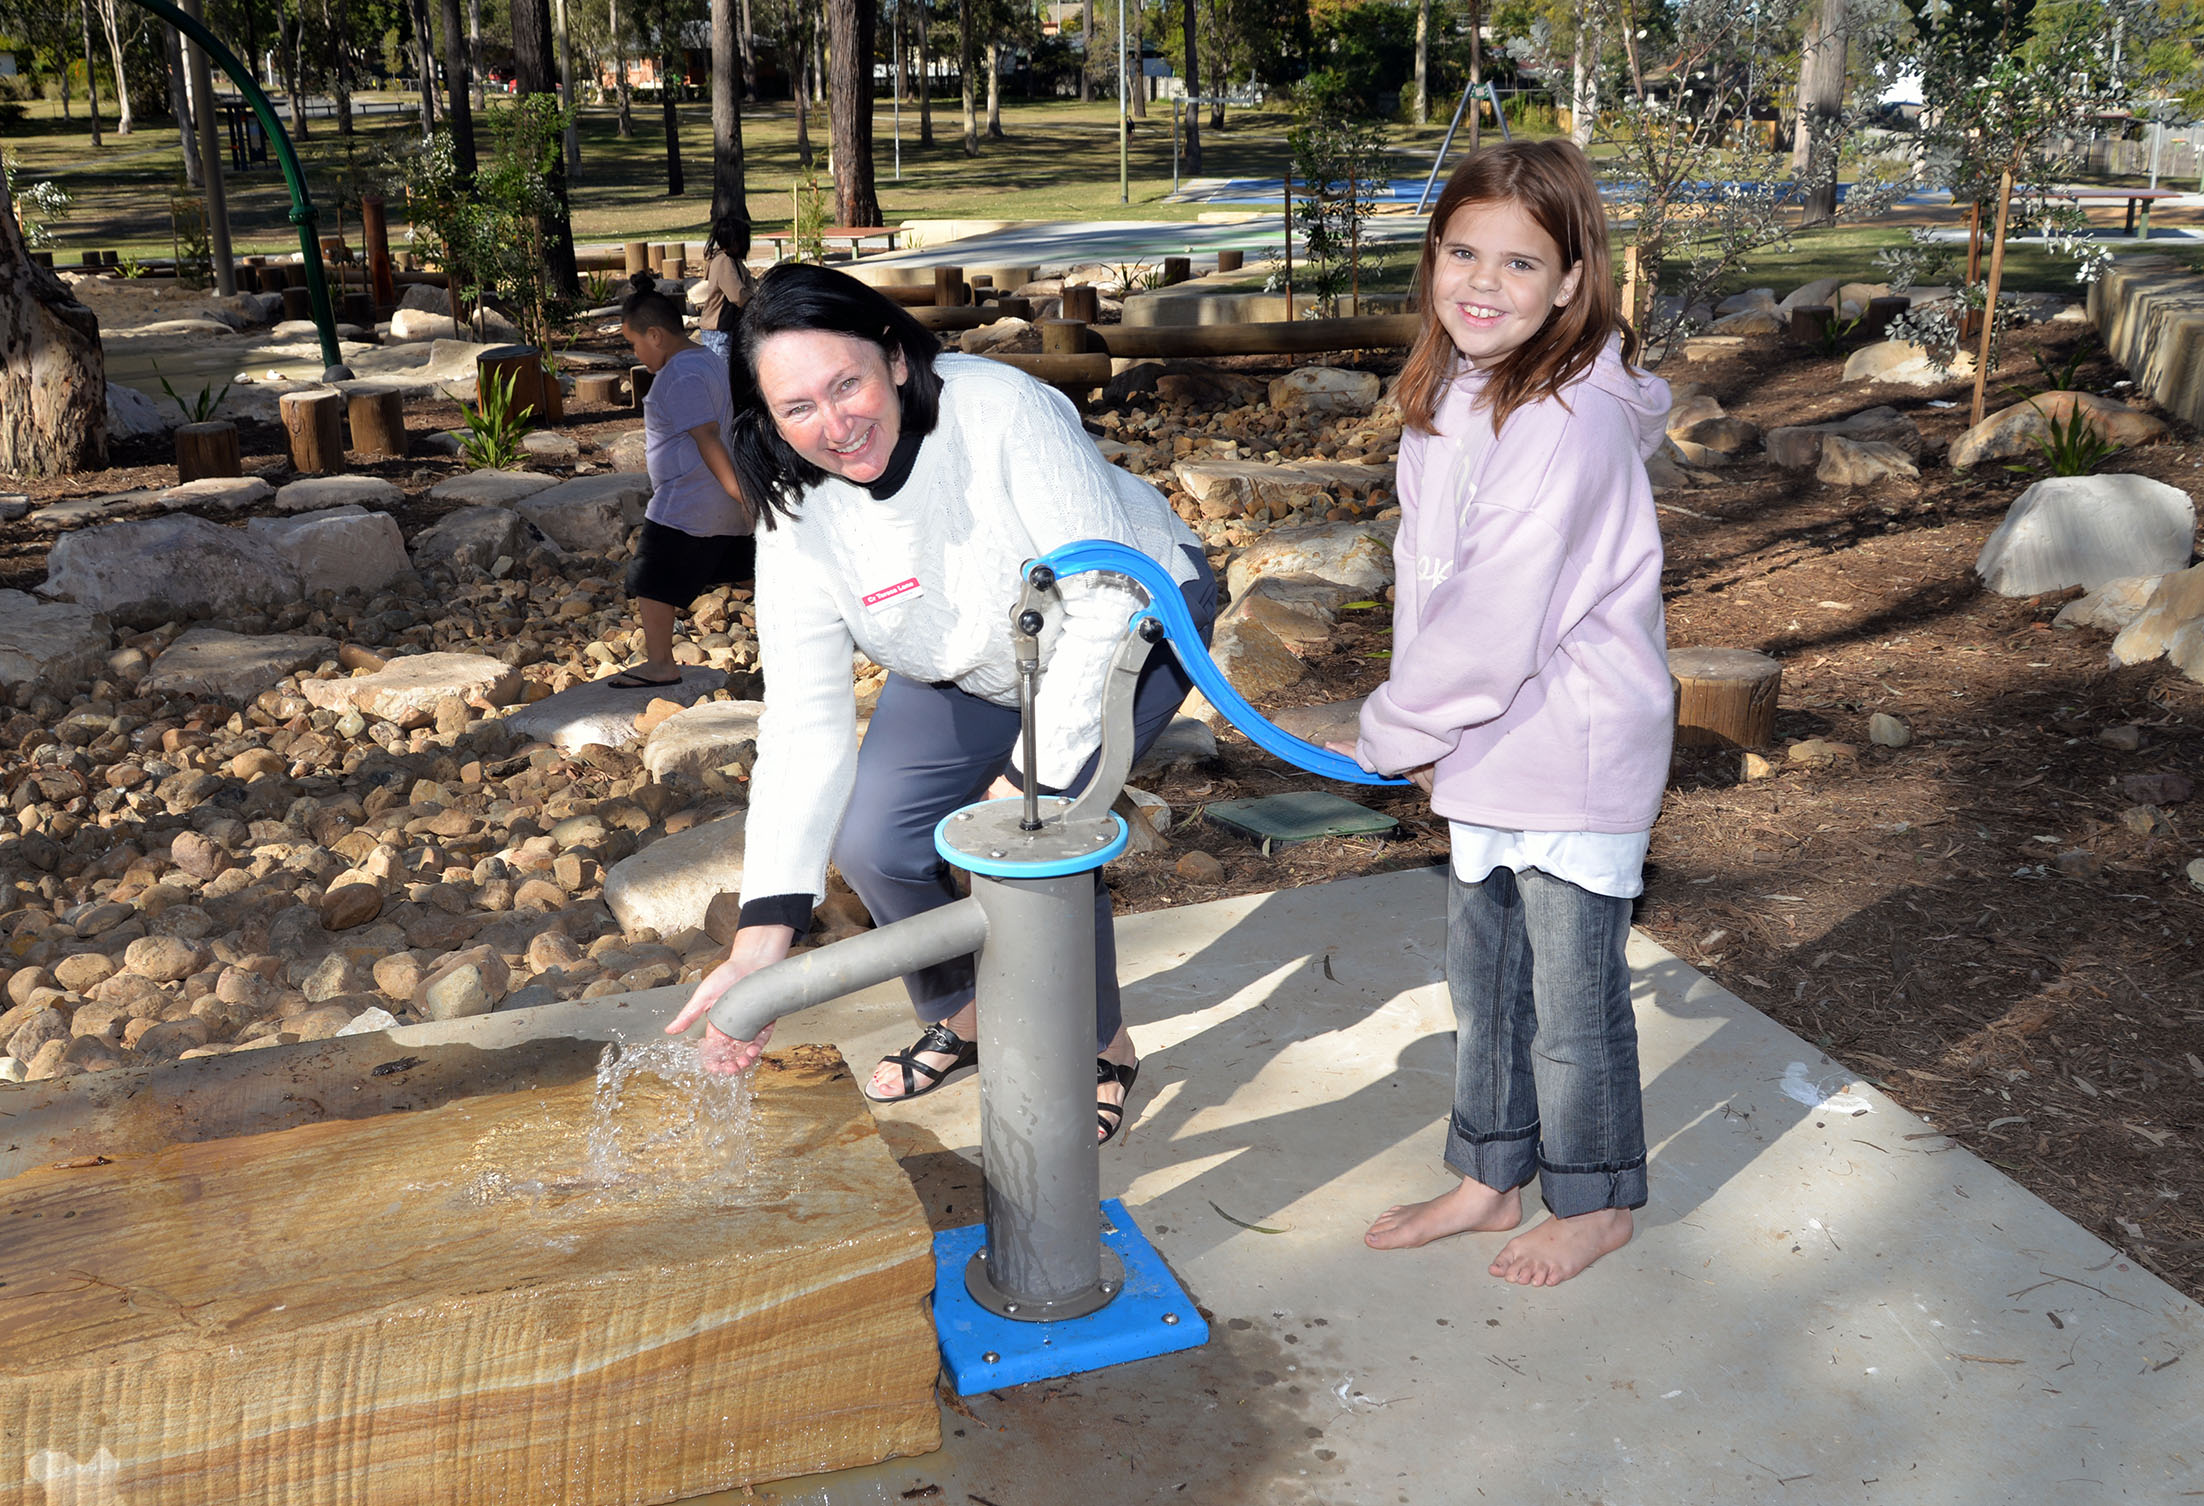 Councillor Teresa Lane explores one of the new water play pumps with Jade Harper, 10, in Eridani Park at Kingston which has undergone a $1.7 million upgrade.